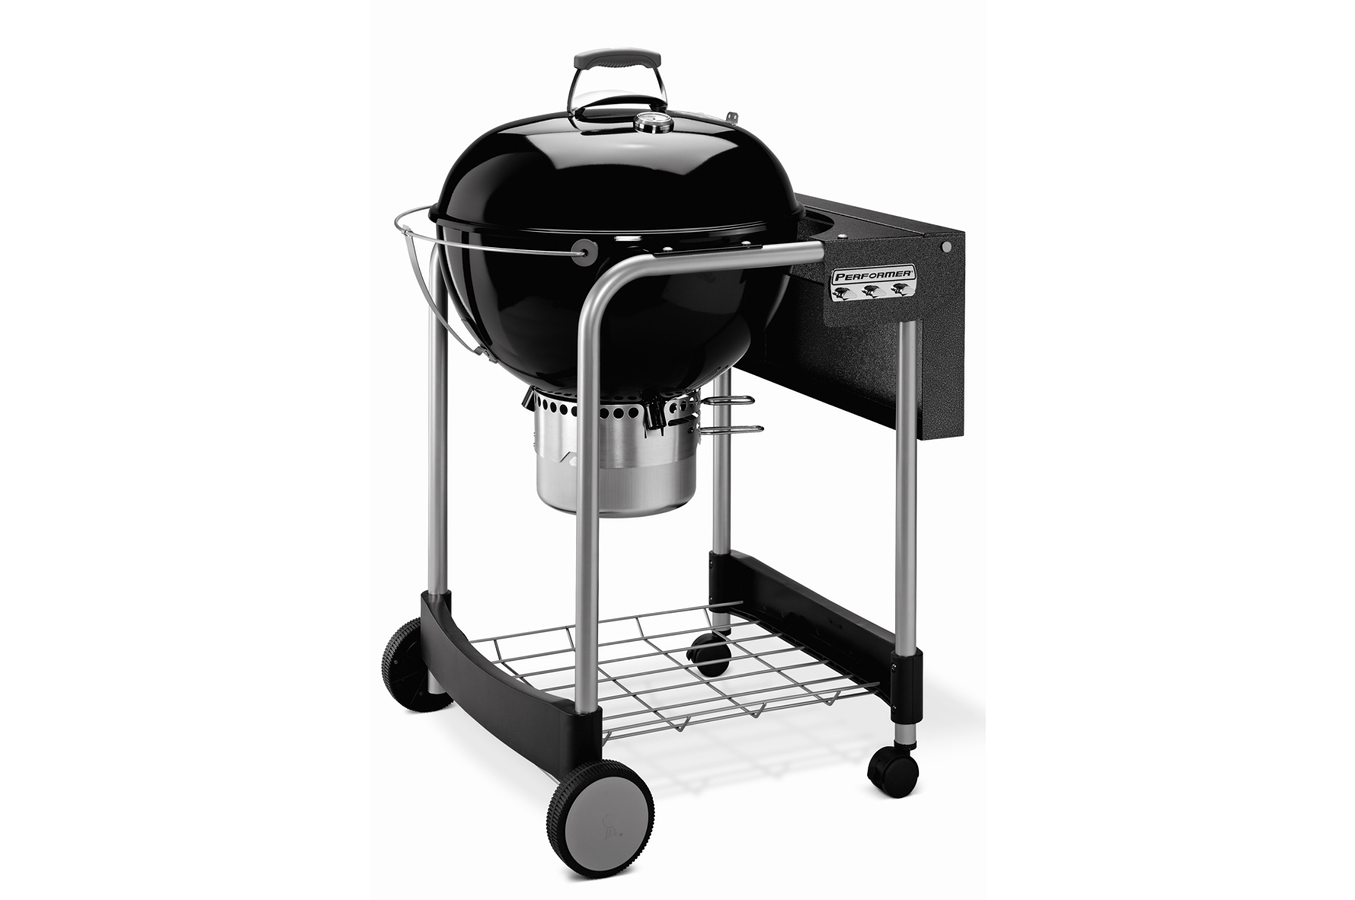 barbecue weber performer